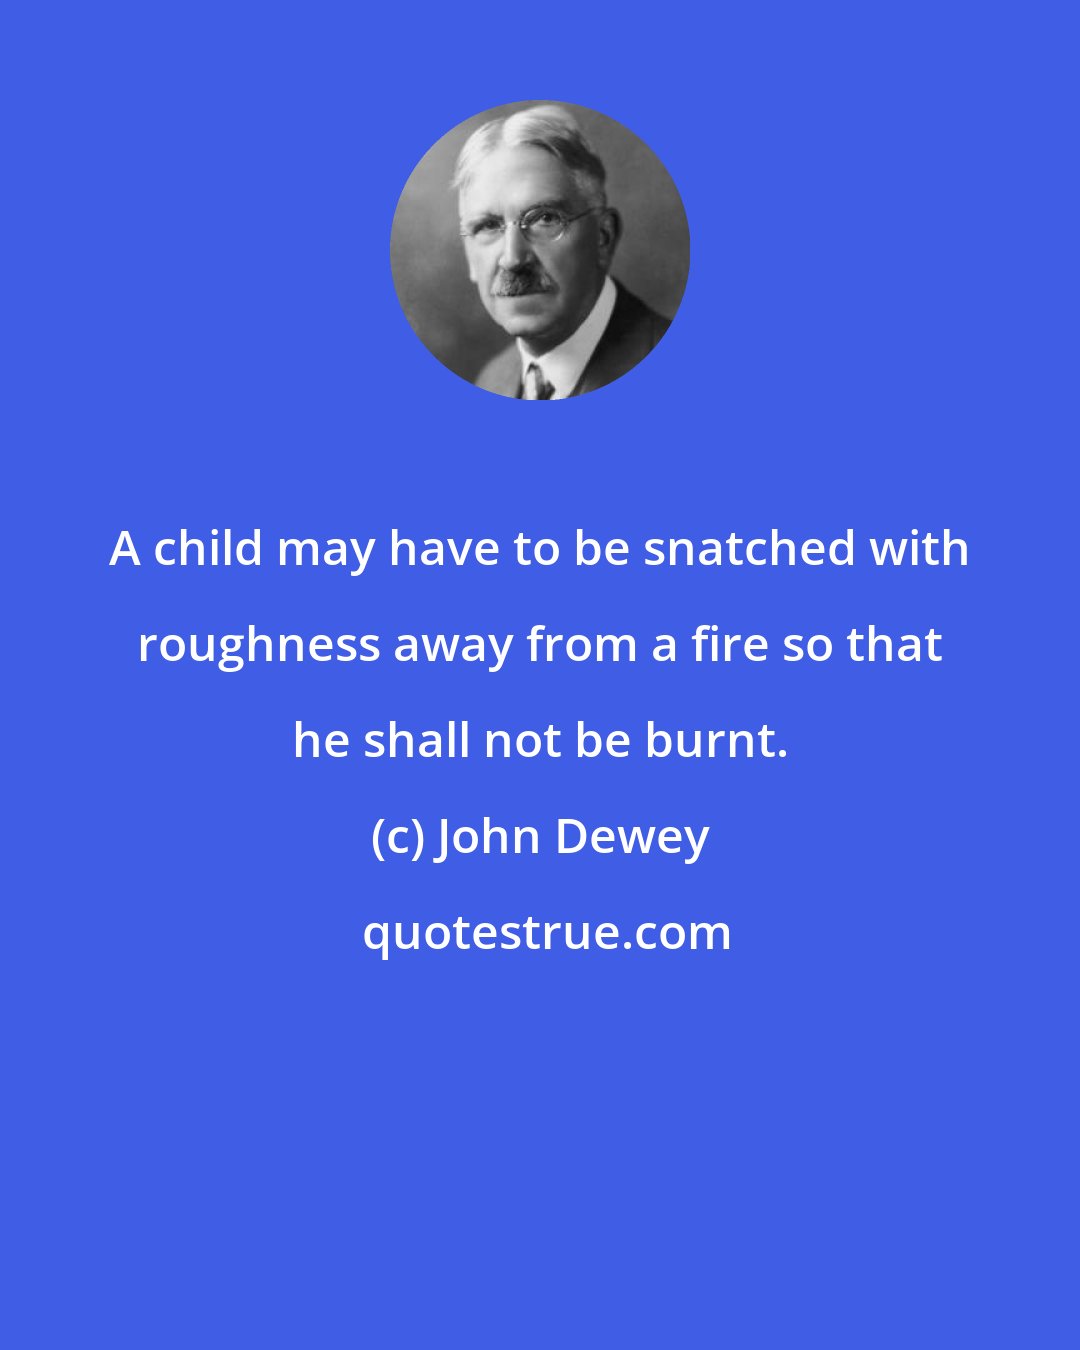 John Dewey: A child may have to be snatched with roughness away from a fire so that he shall not be burnt.